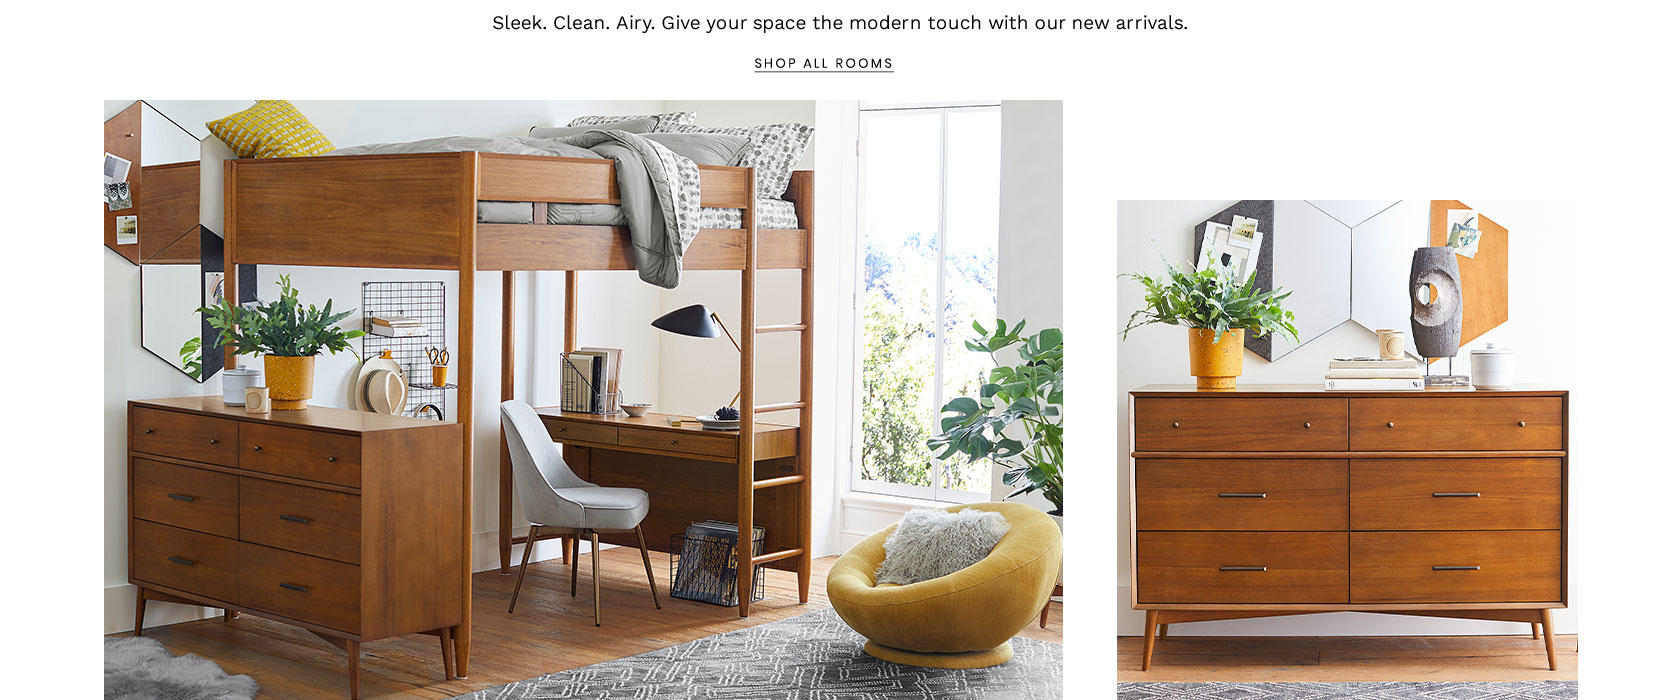 Sleek. Clean. Airy. Give your space the modern touch with our new arrivals. Shop All Rooms